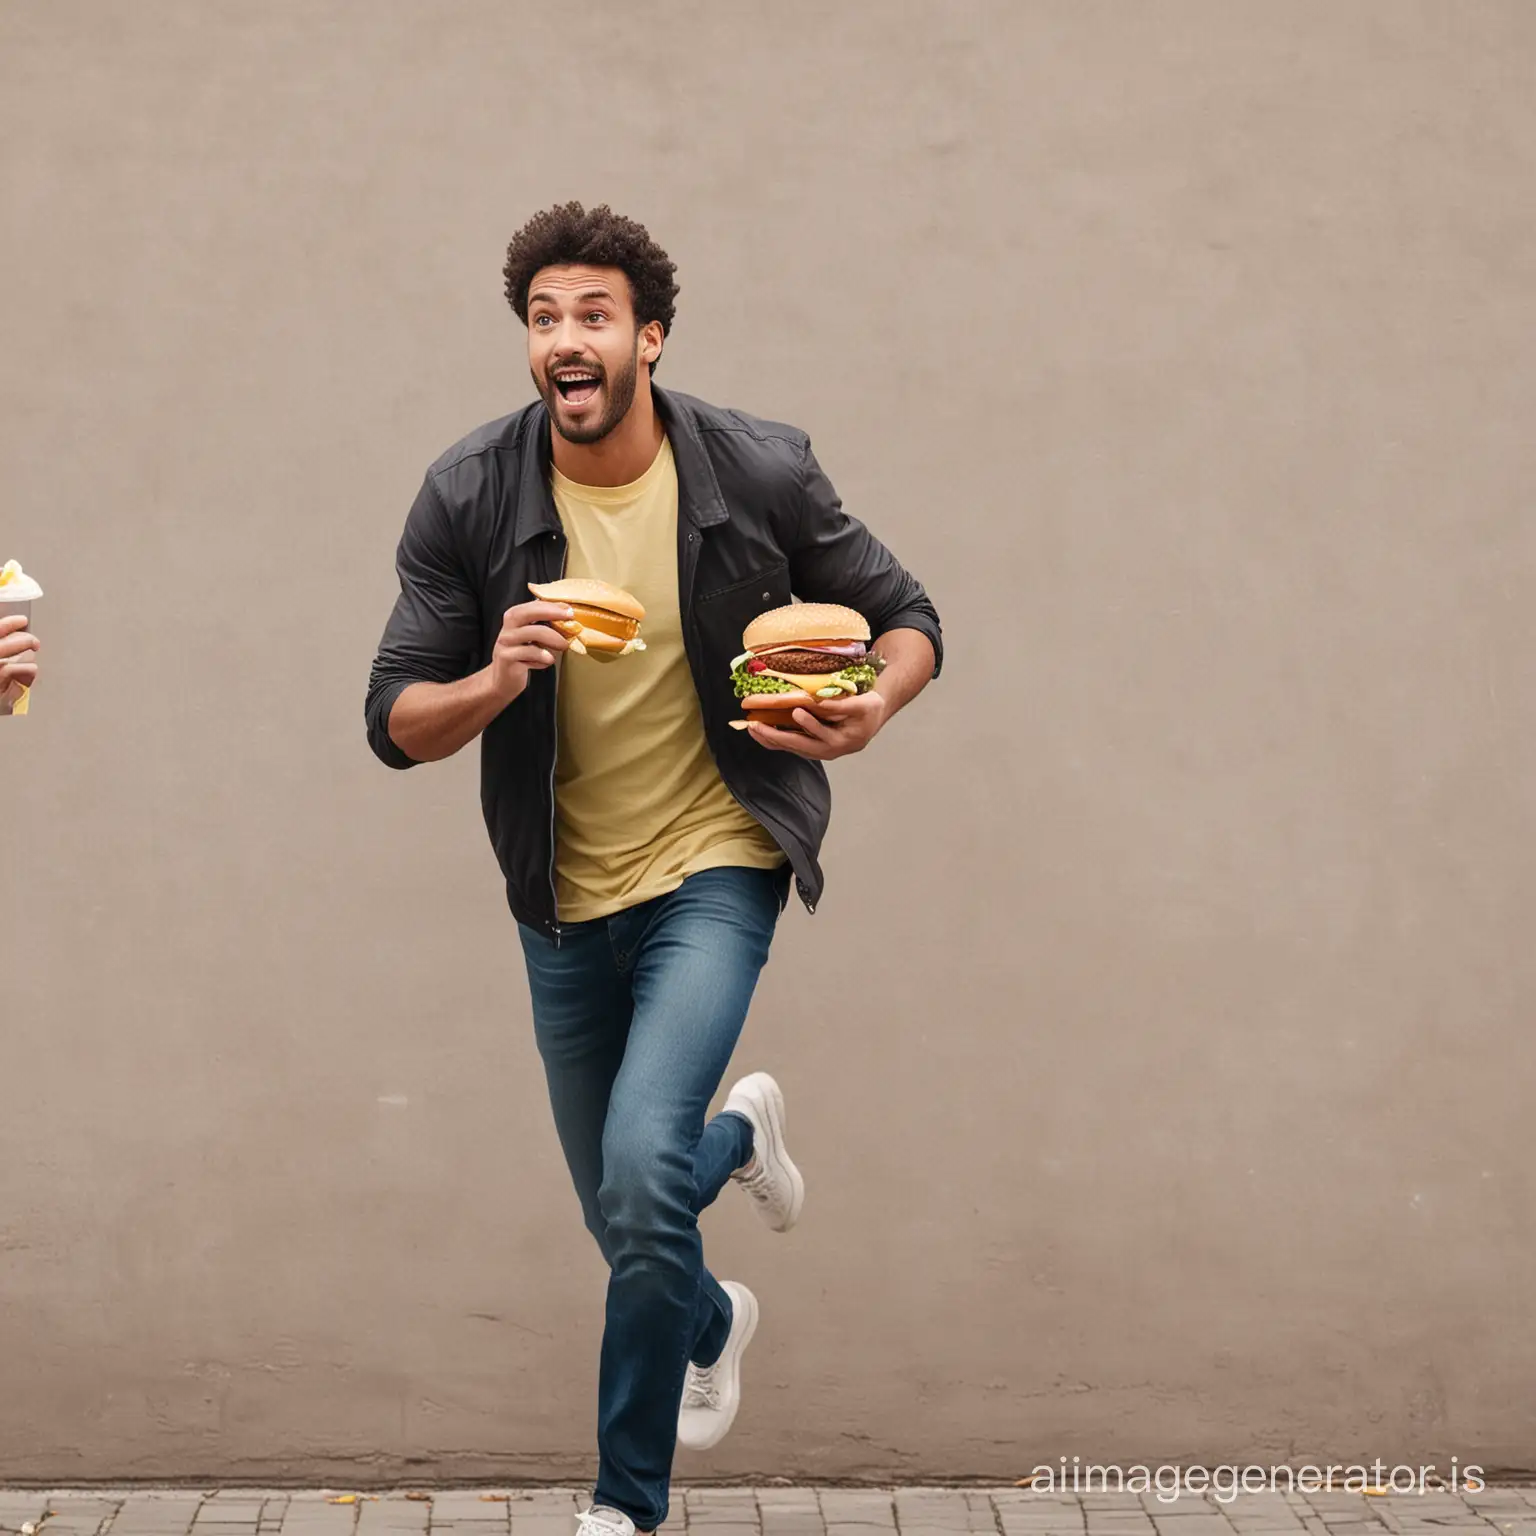 man running away from friends offering him hamburger and chips